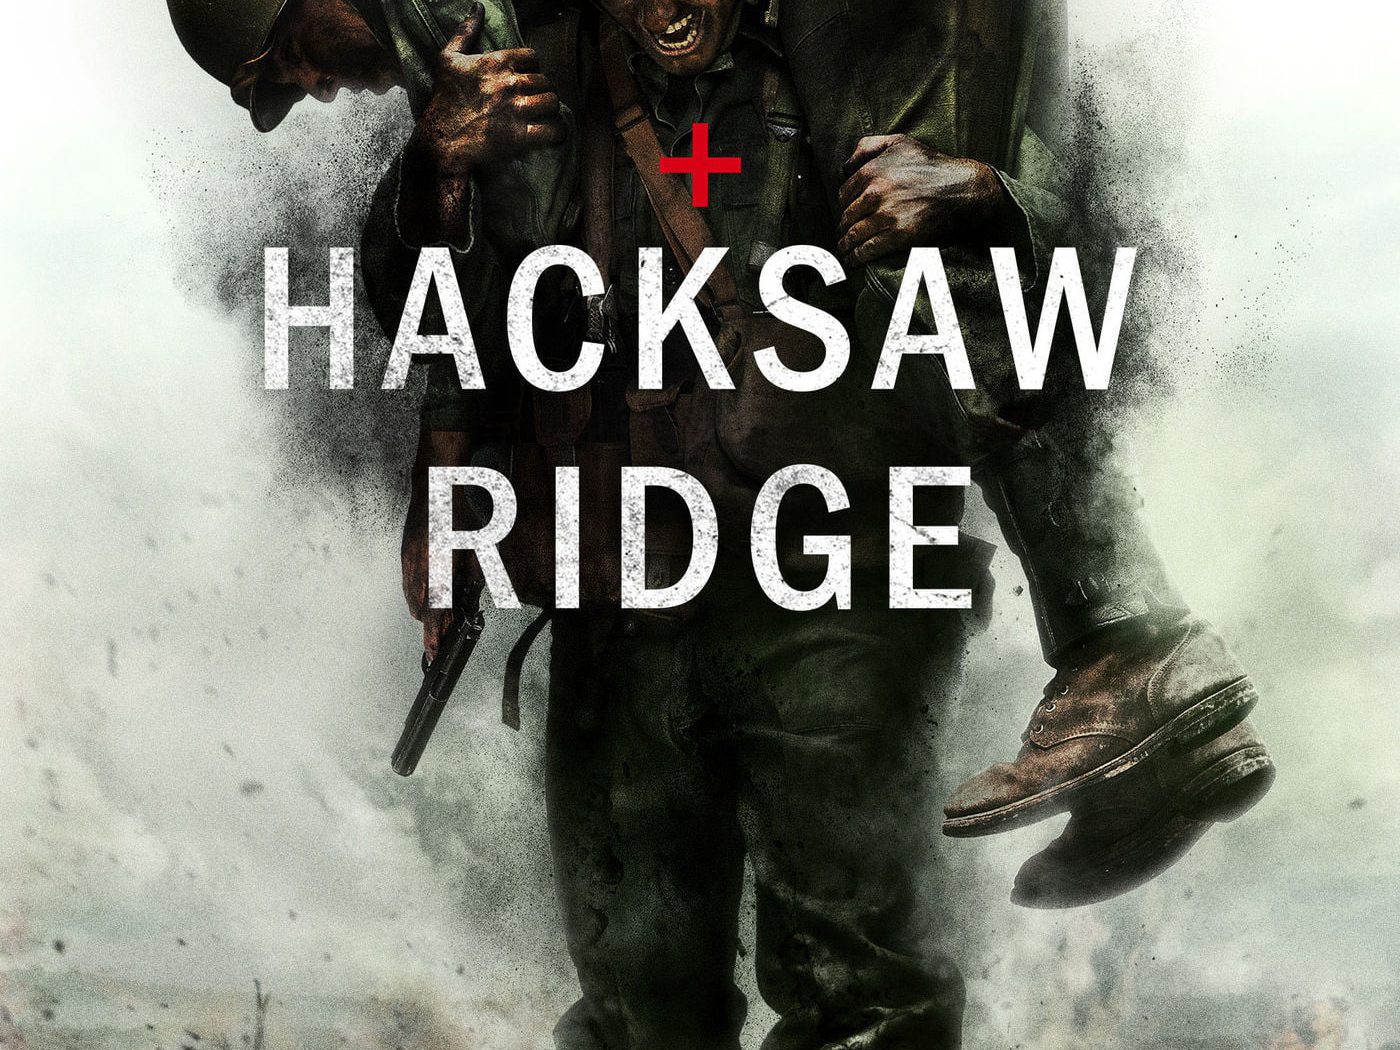 Poster for the movie "Hacksaw Ridge"